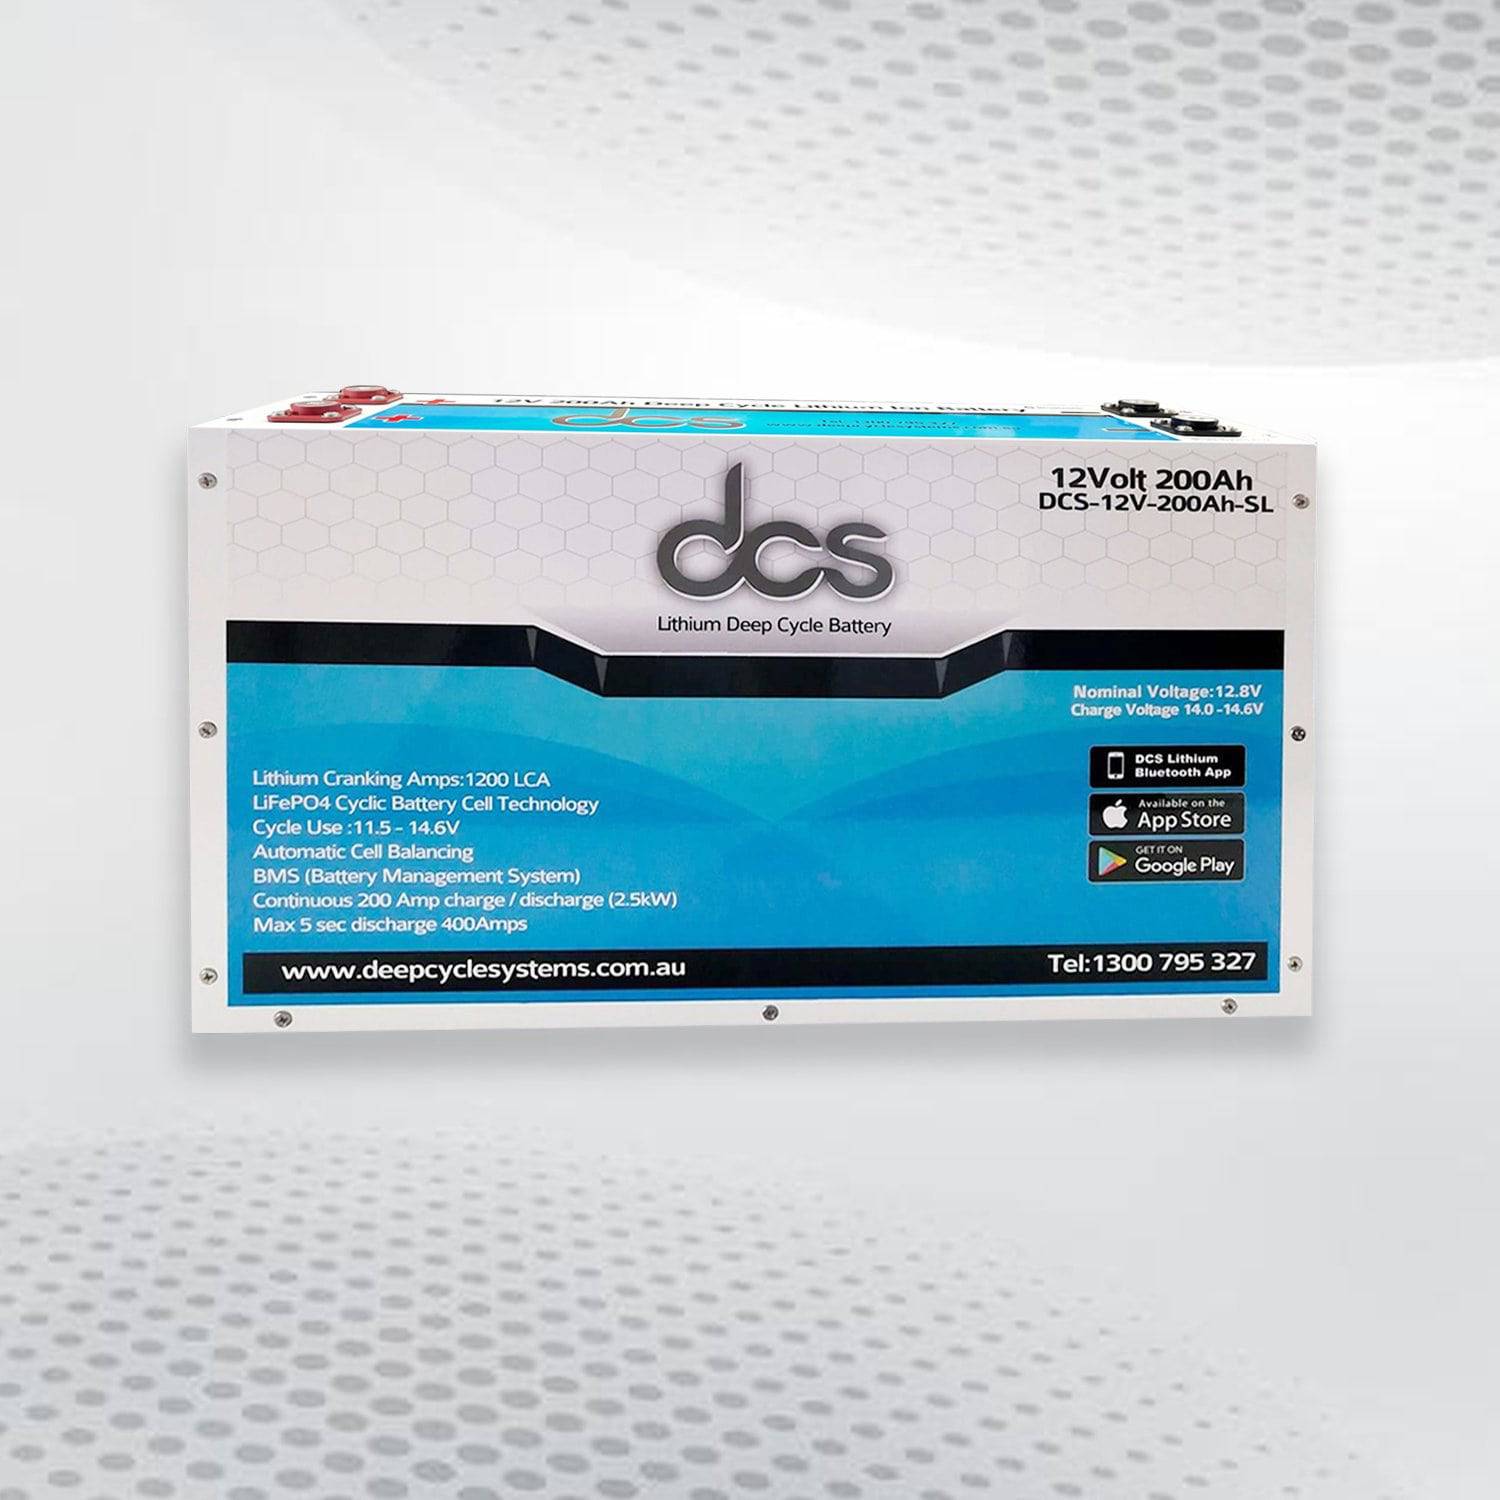 DCS 12V 200AH SLIM LINE (LITHIUM) Deep Cycle Systems | Deep Cycle Systems